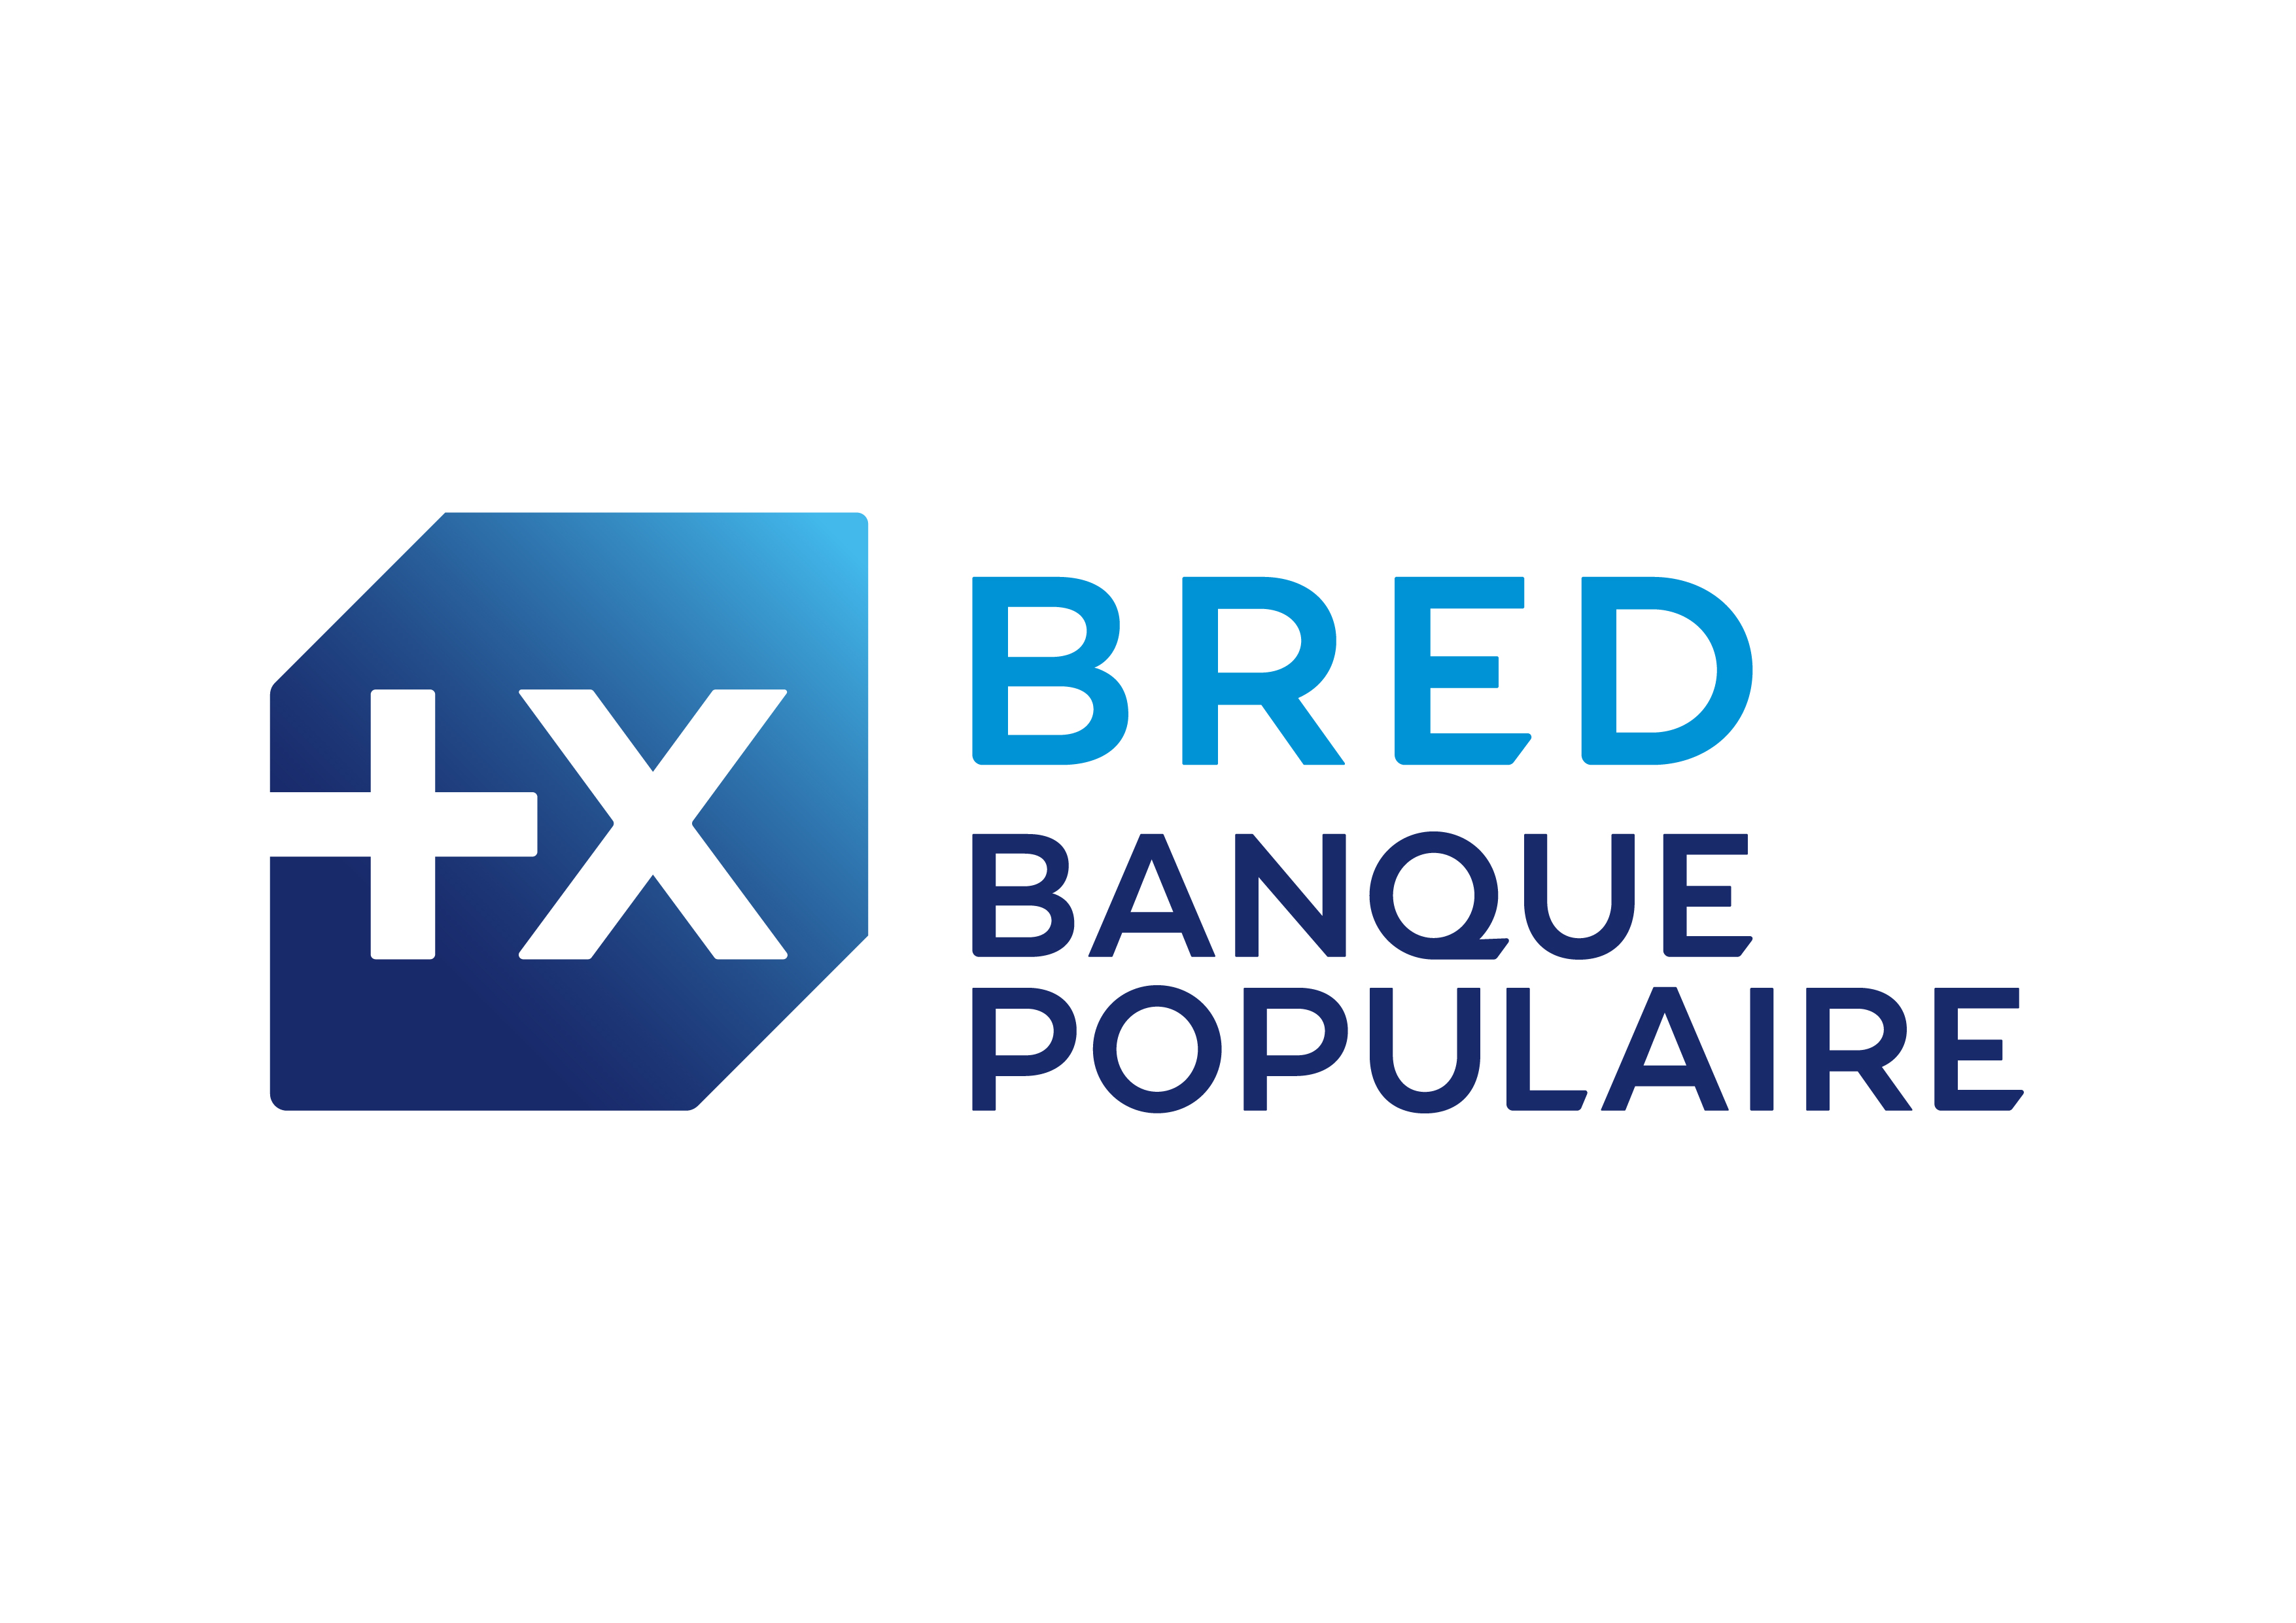 Bred Banque populaire